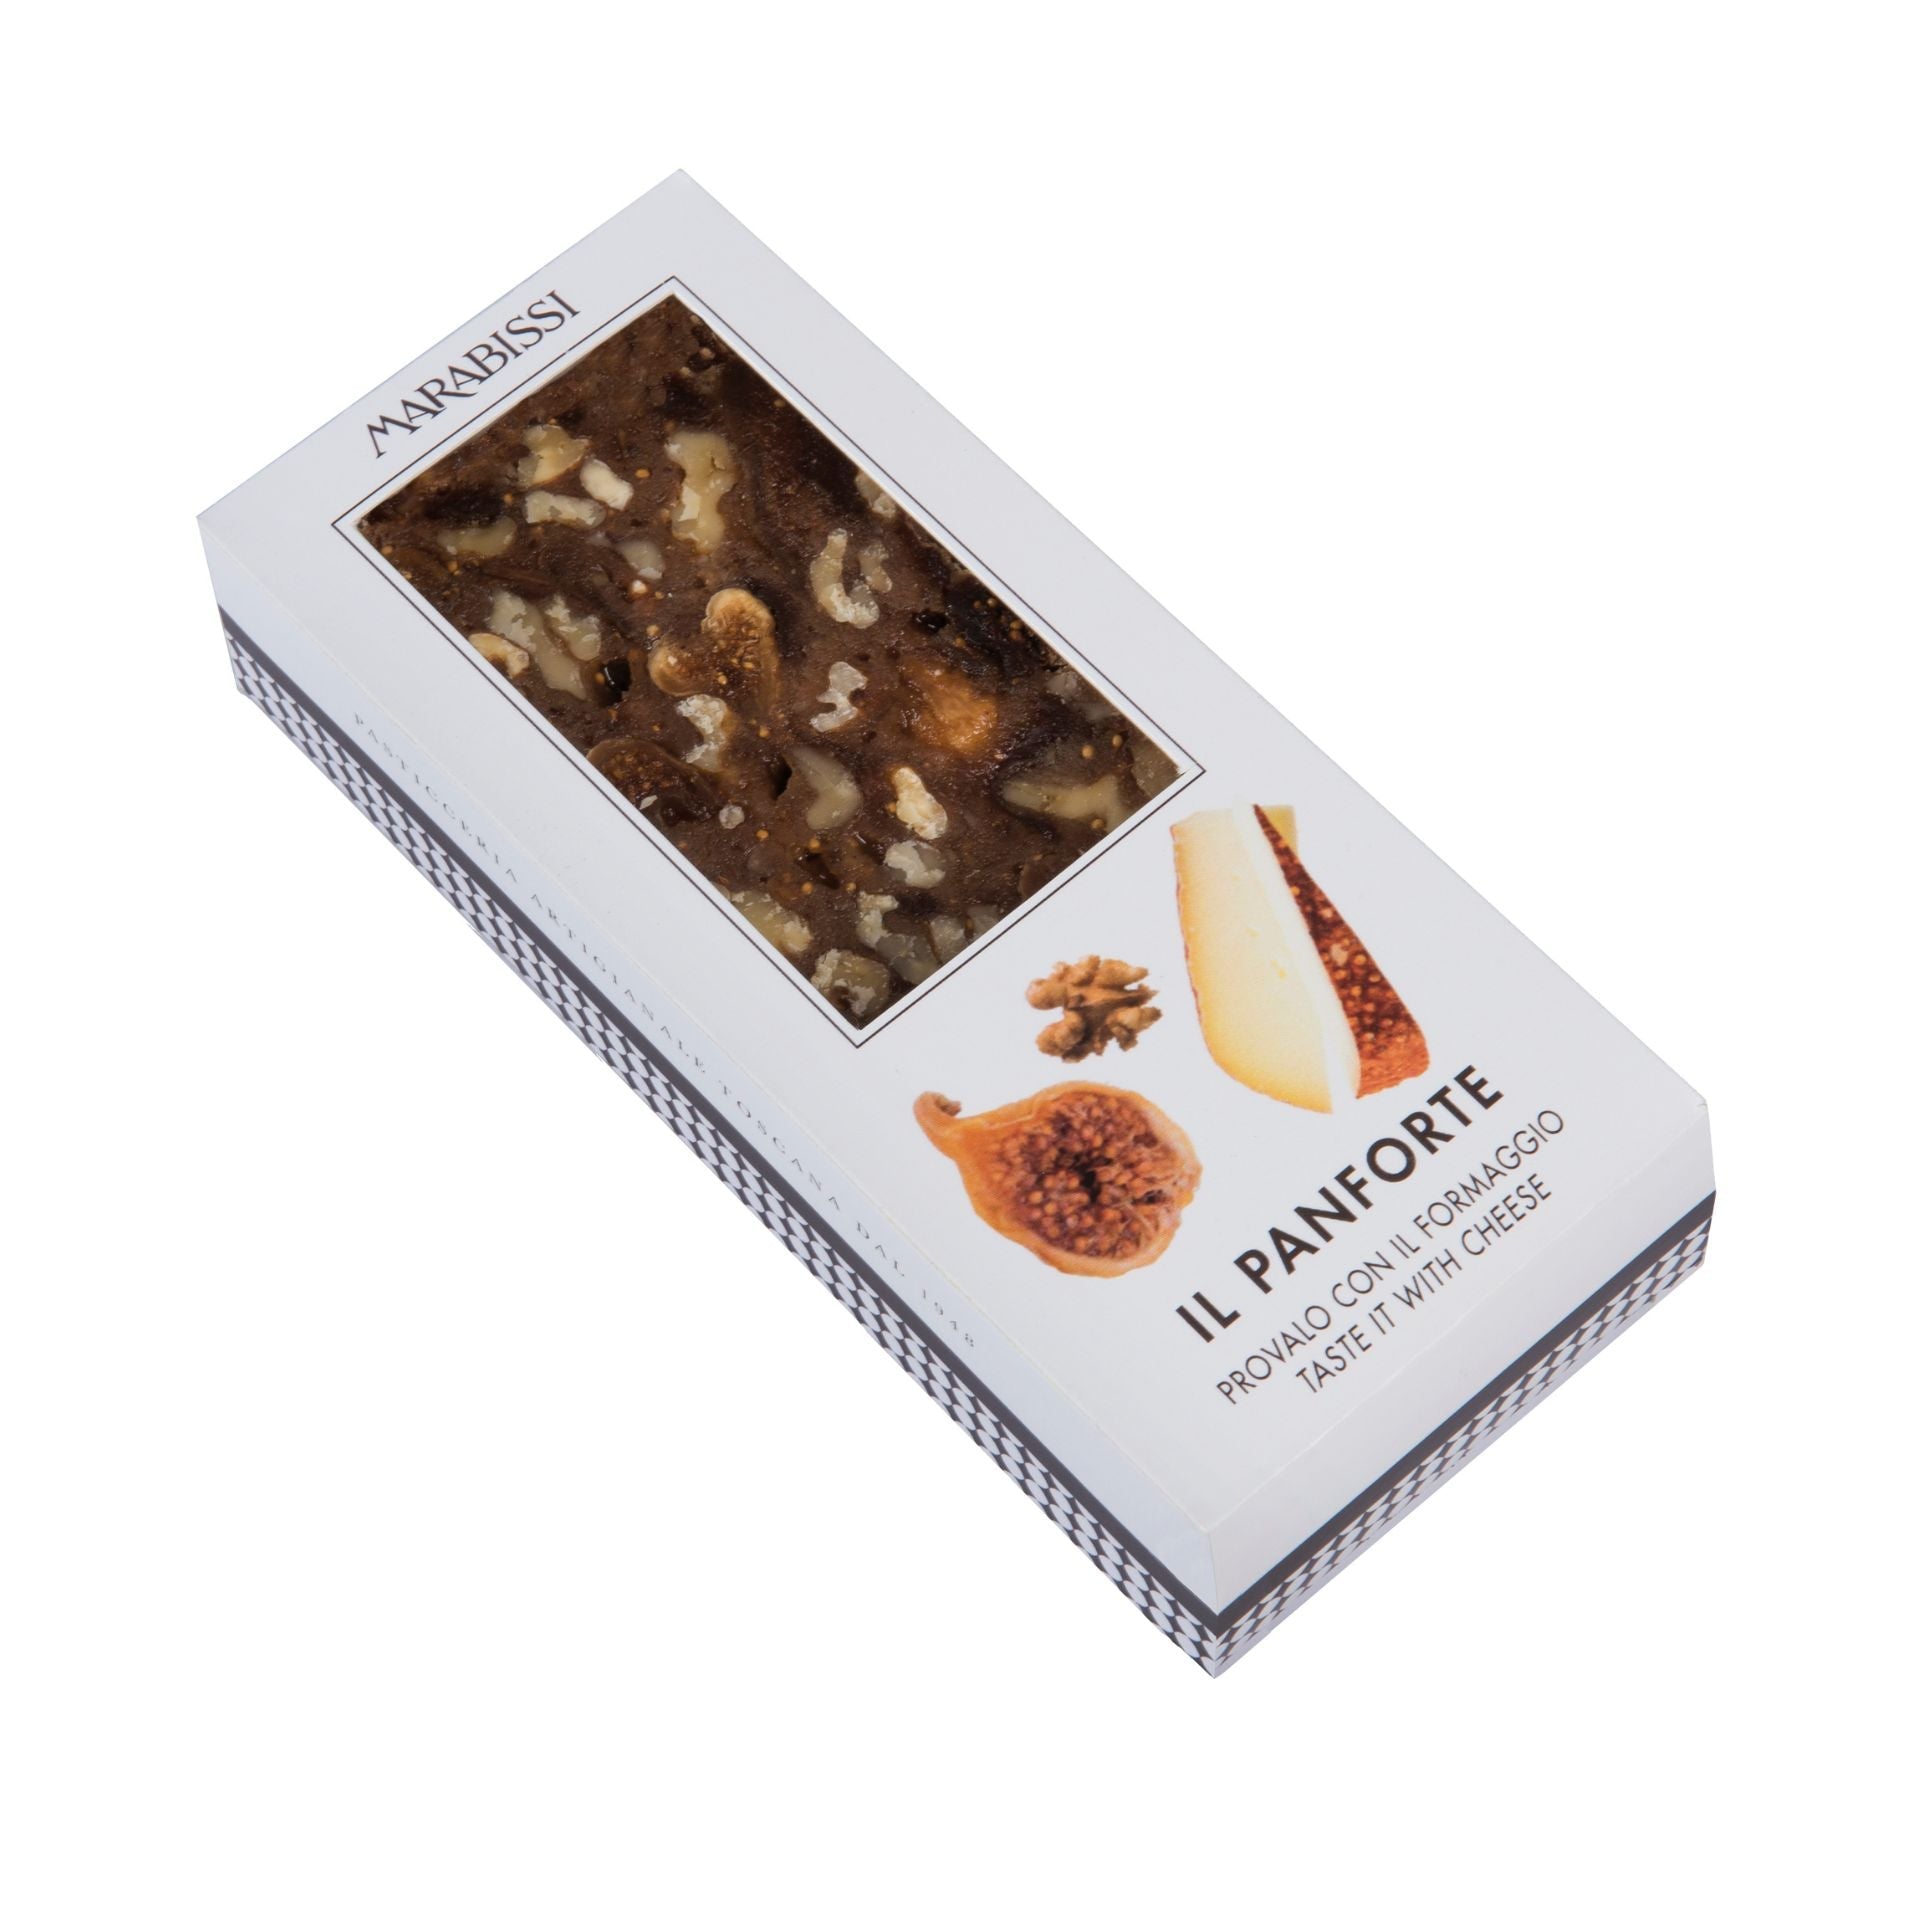 Marabissi Fig & Walnut Panforte Cake (Box) 200g  | Imported and distributed in the UK by Just Gourmet Foods